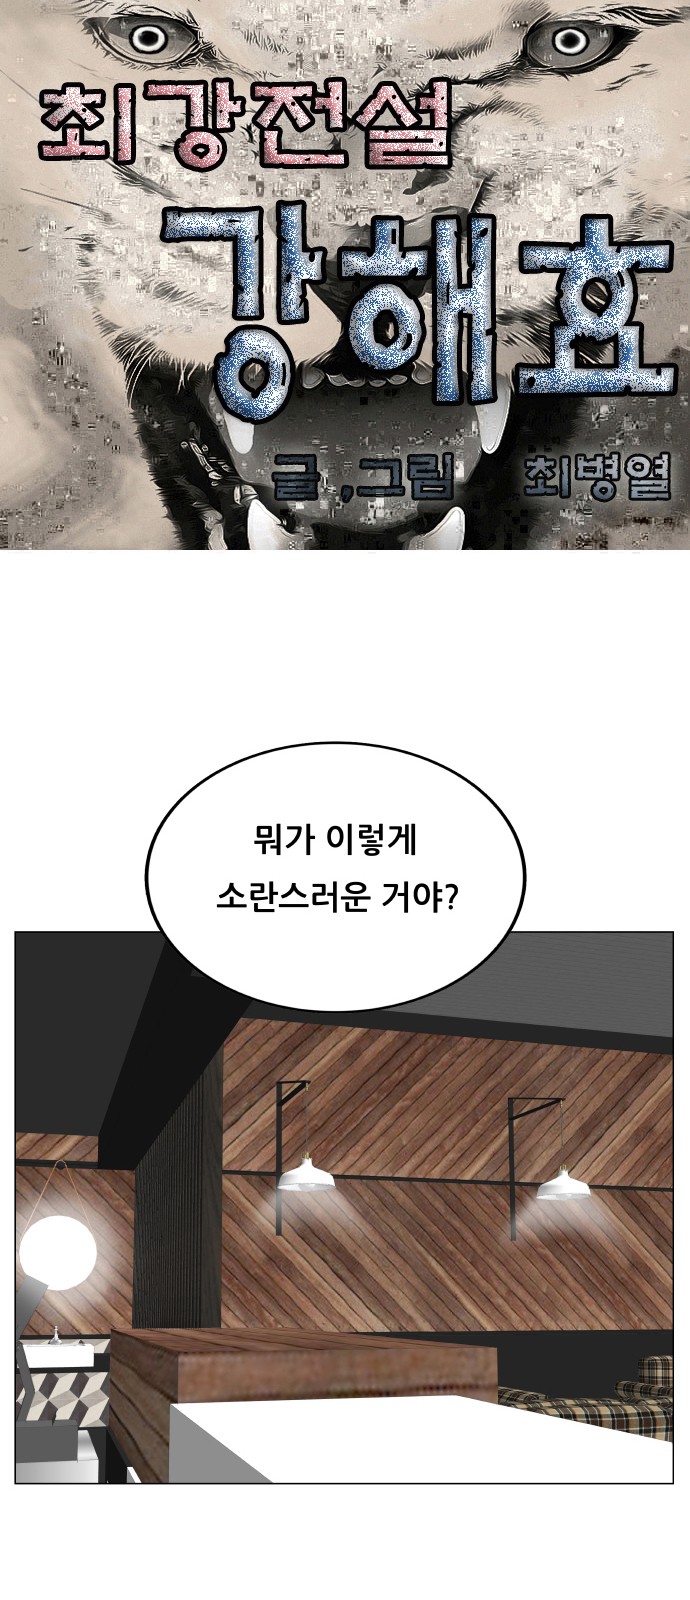 Ultimate Legend - Kang Hae Hyo - Chapter 459 - Page 1